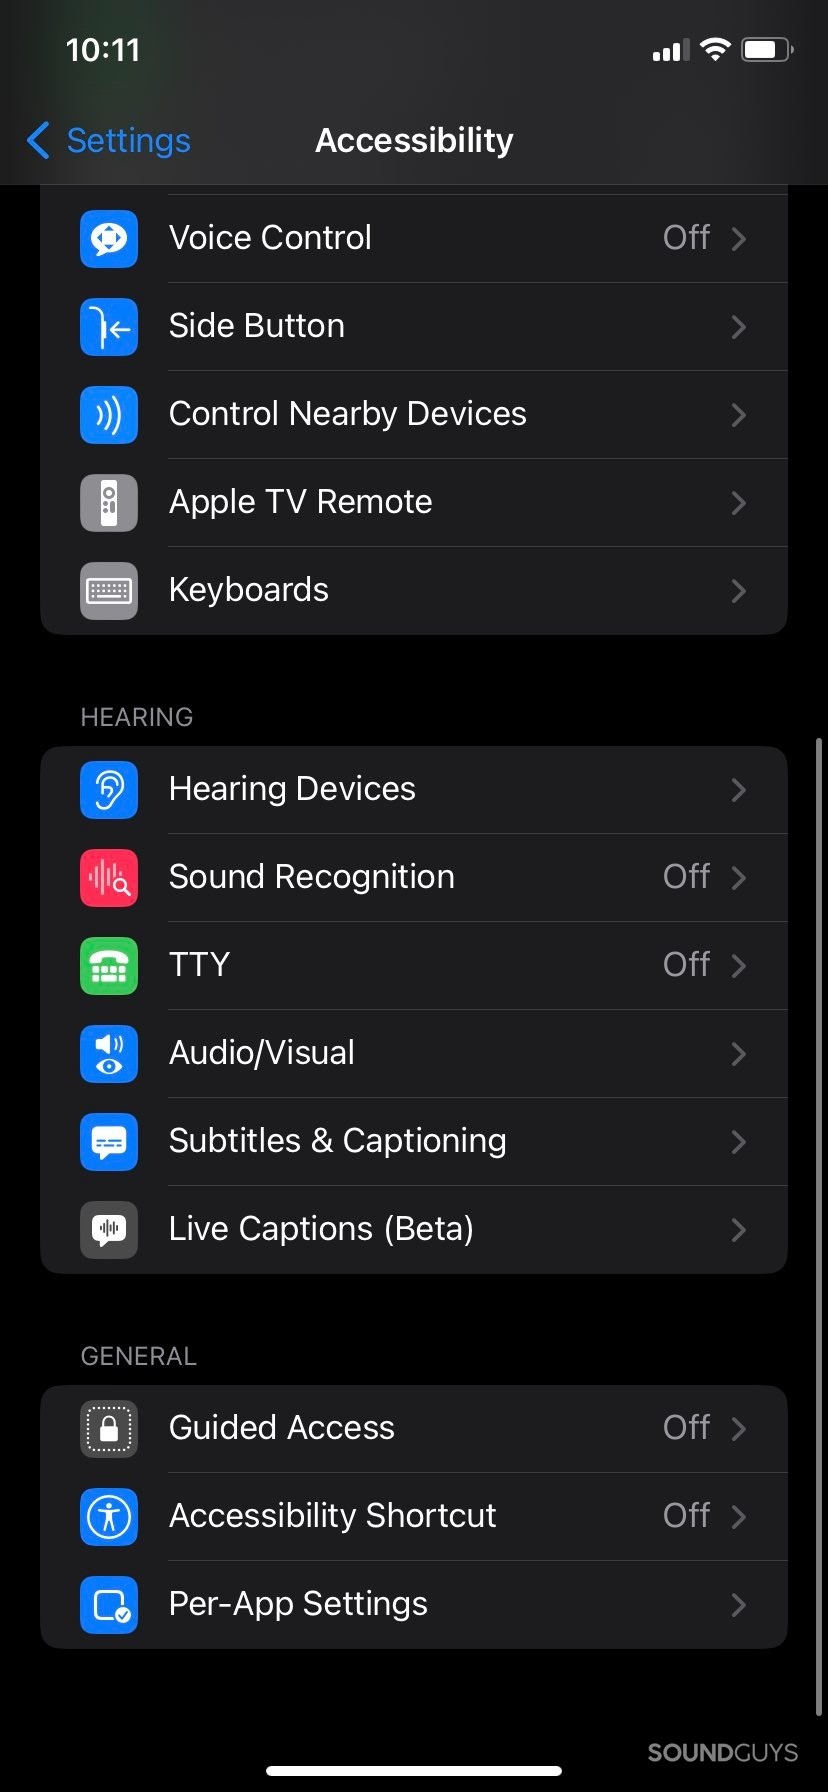 The accessibility settings menu in the iOS Settings app, showing the Audio/Visual menu button in the middle.